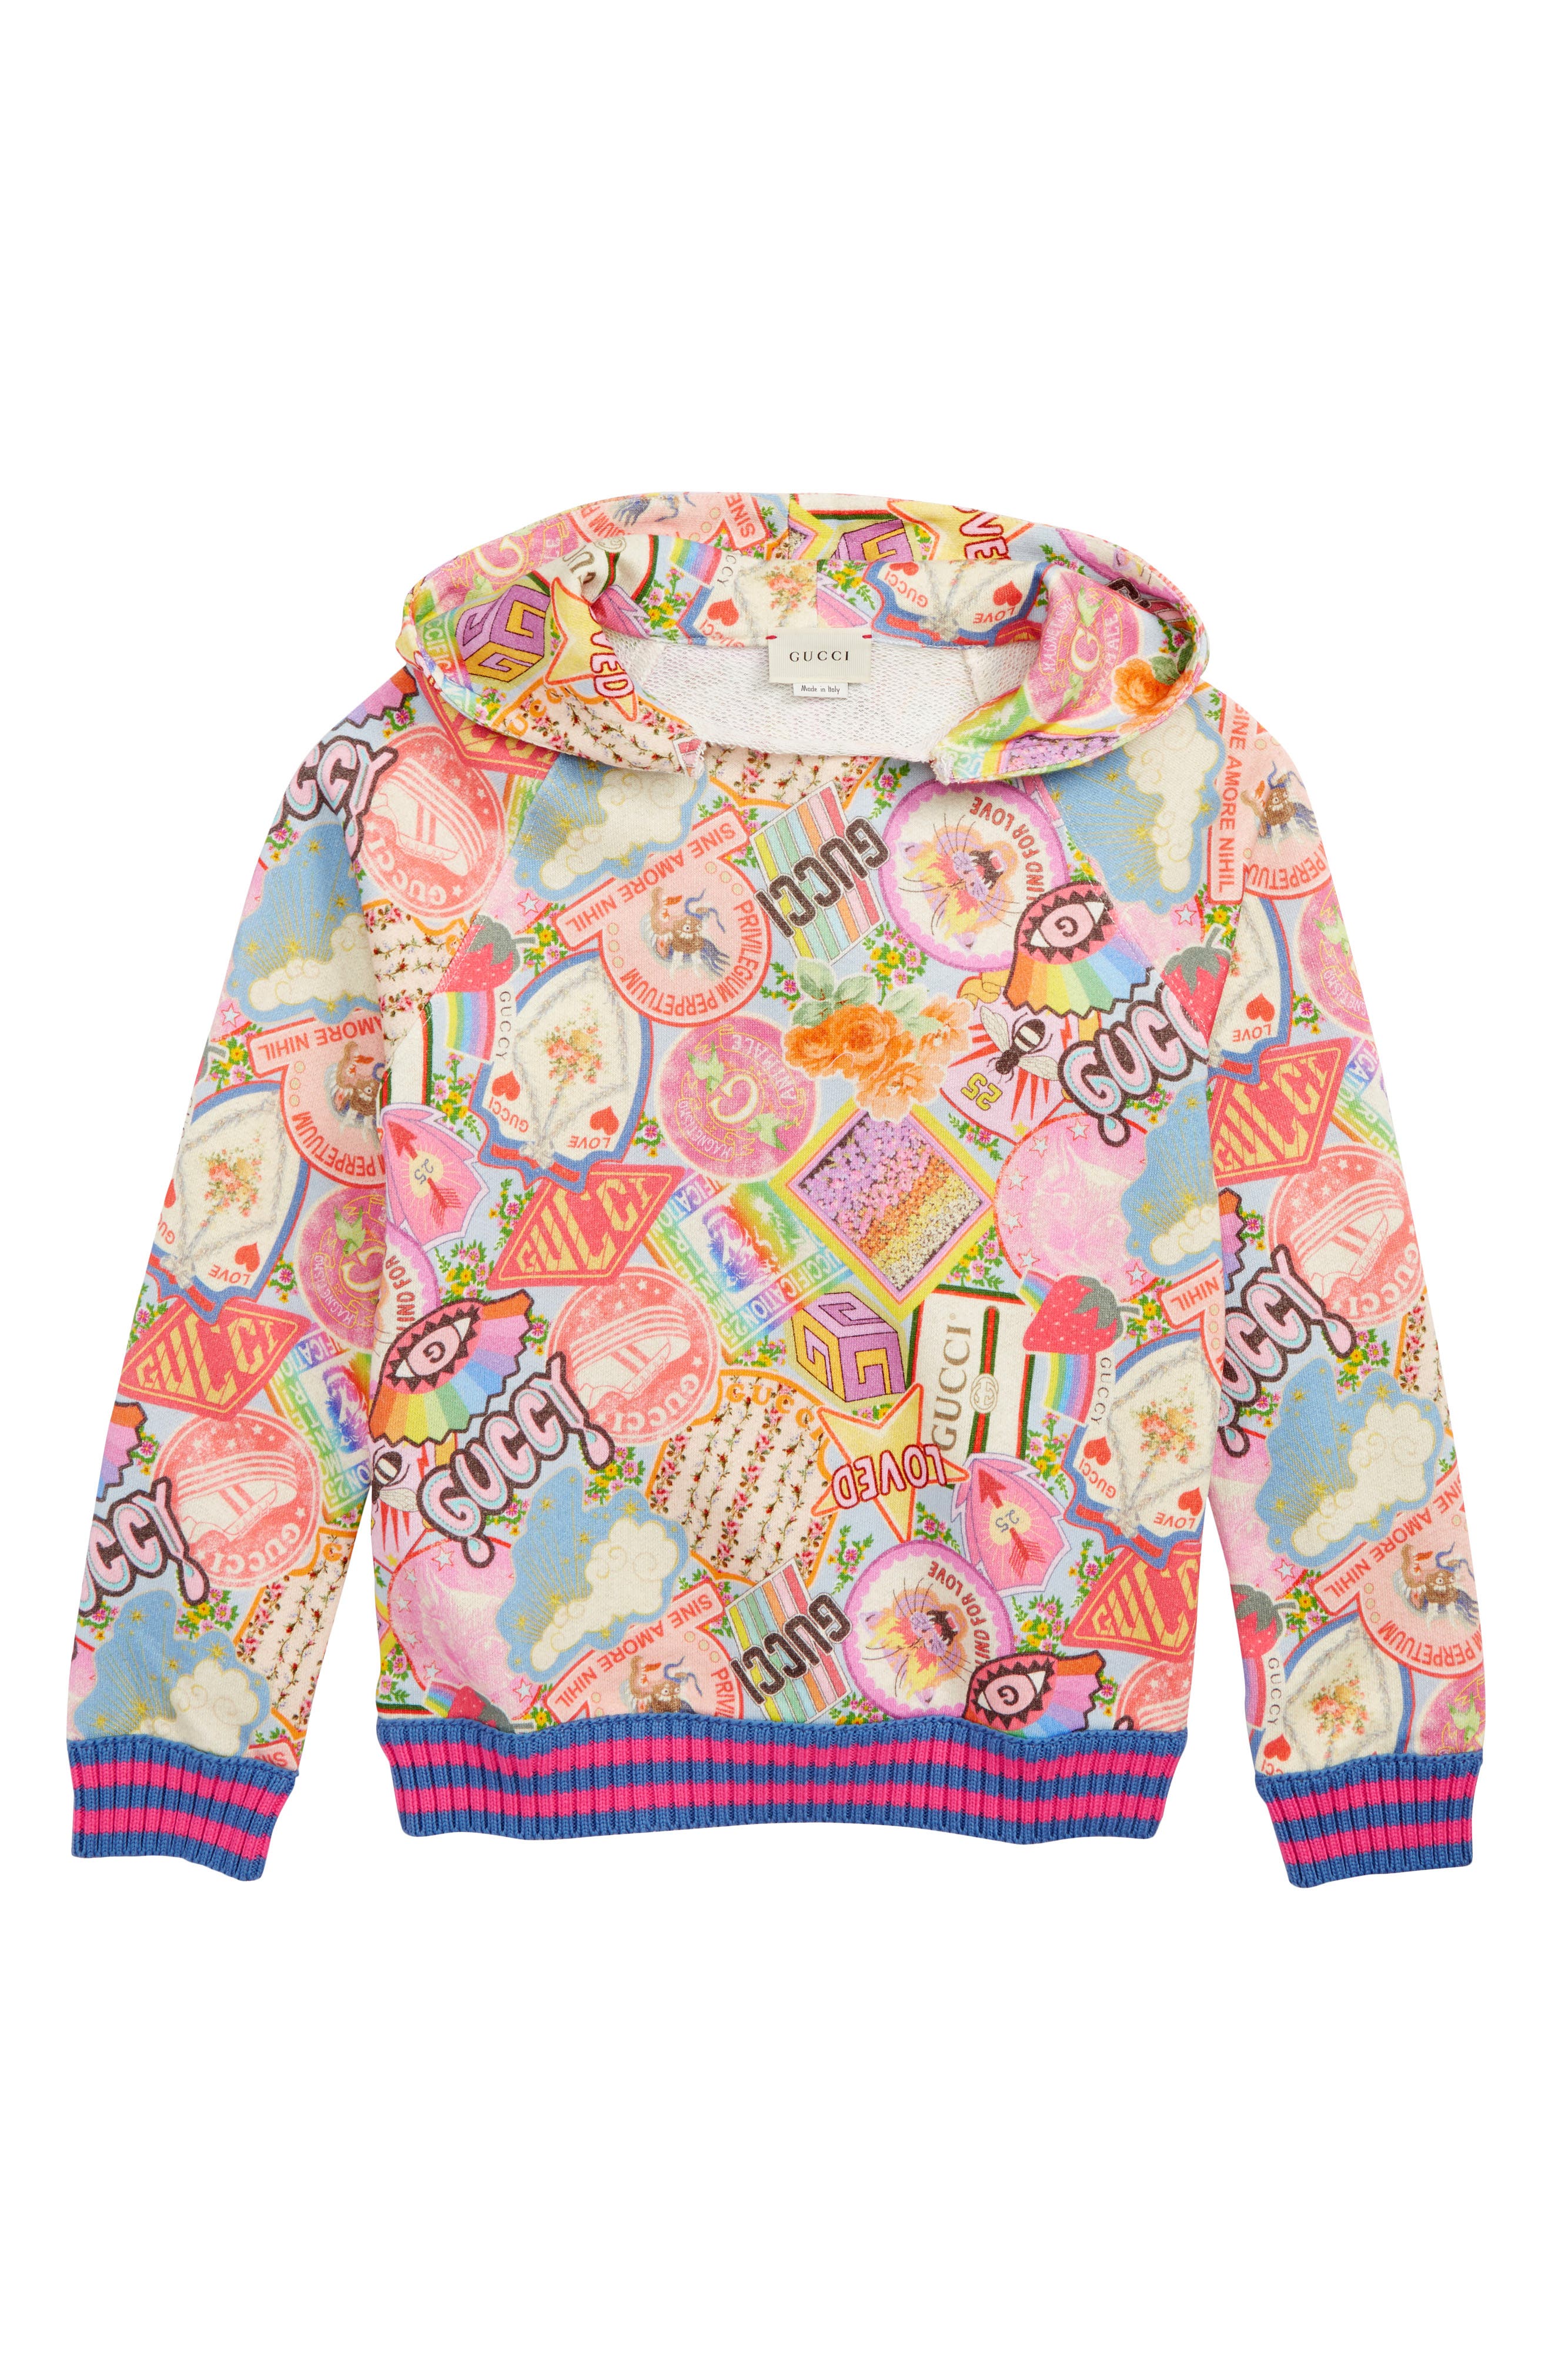 gucci hoodie for girls